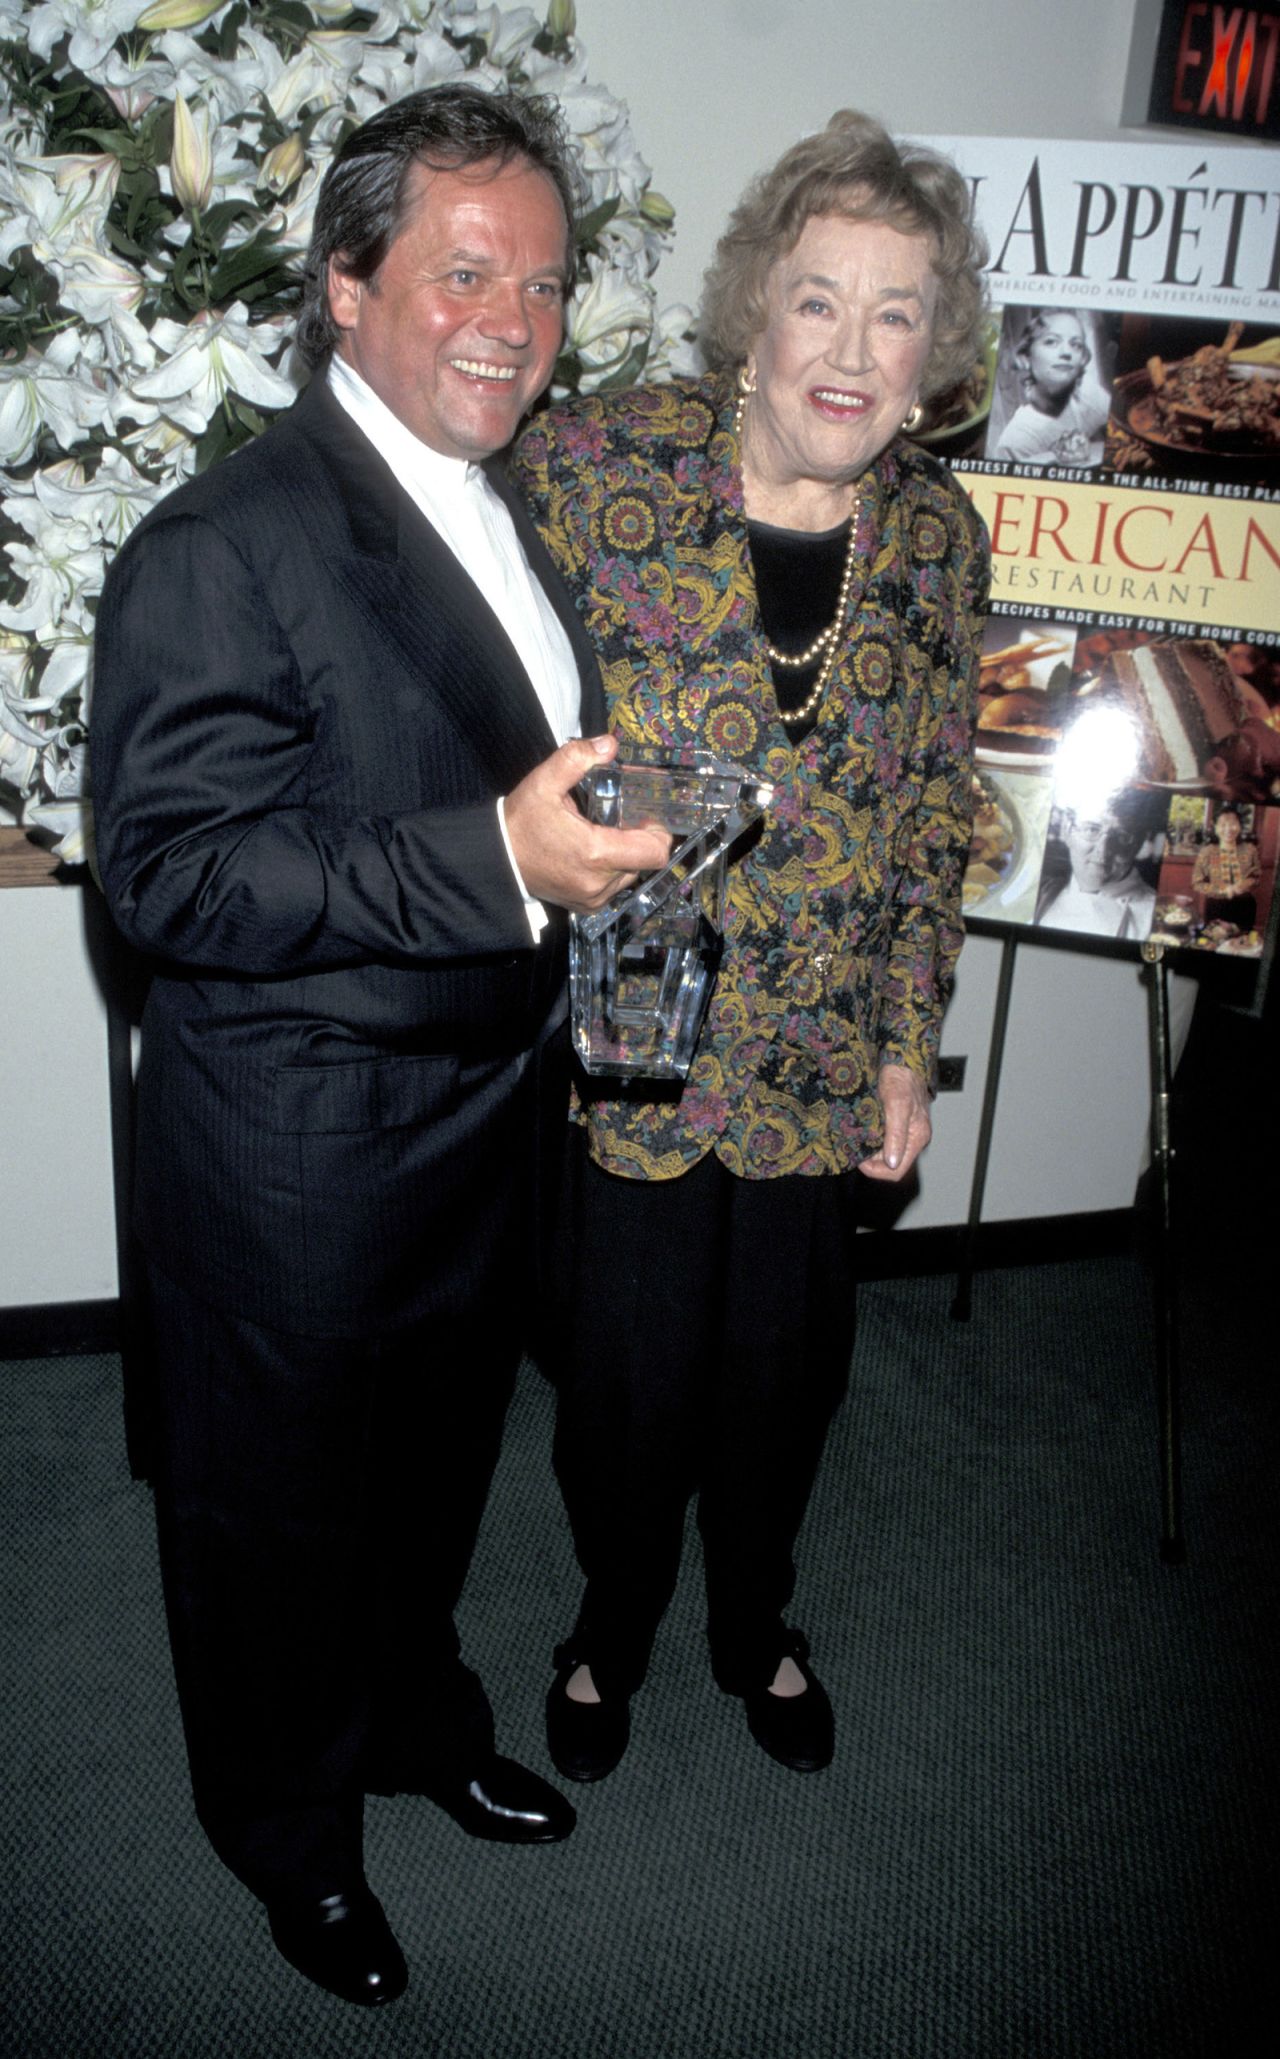 Child and chef Wolfgang Puck attend the Bon Appetit American Food and Entertaining Awards in New York in September 1998.